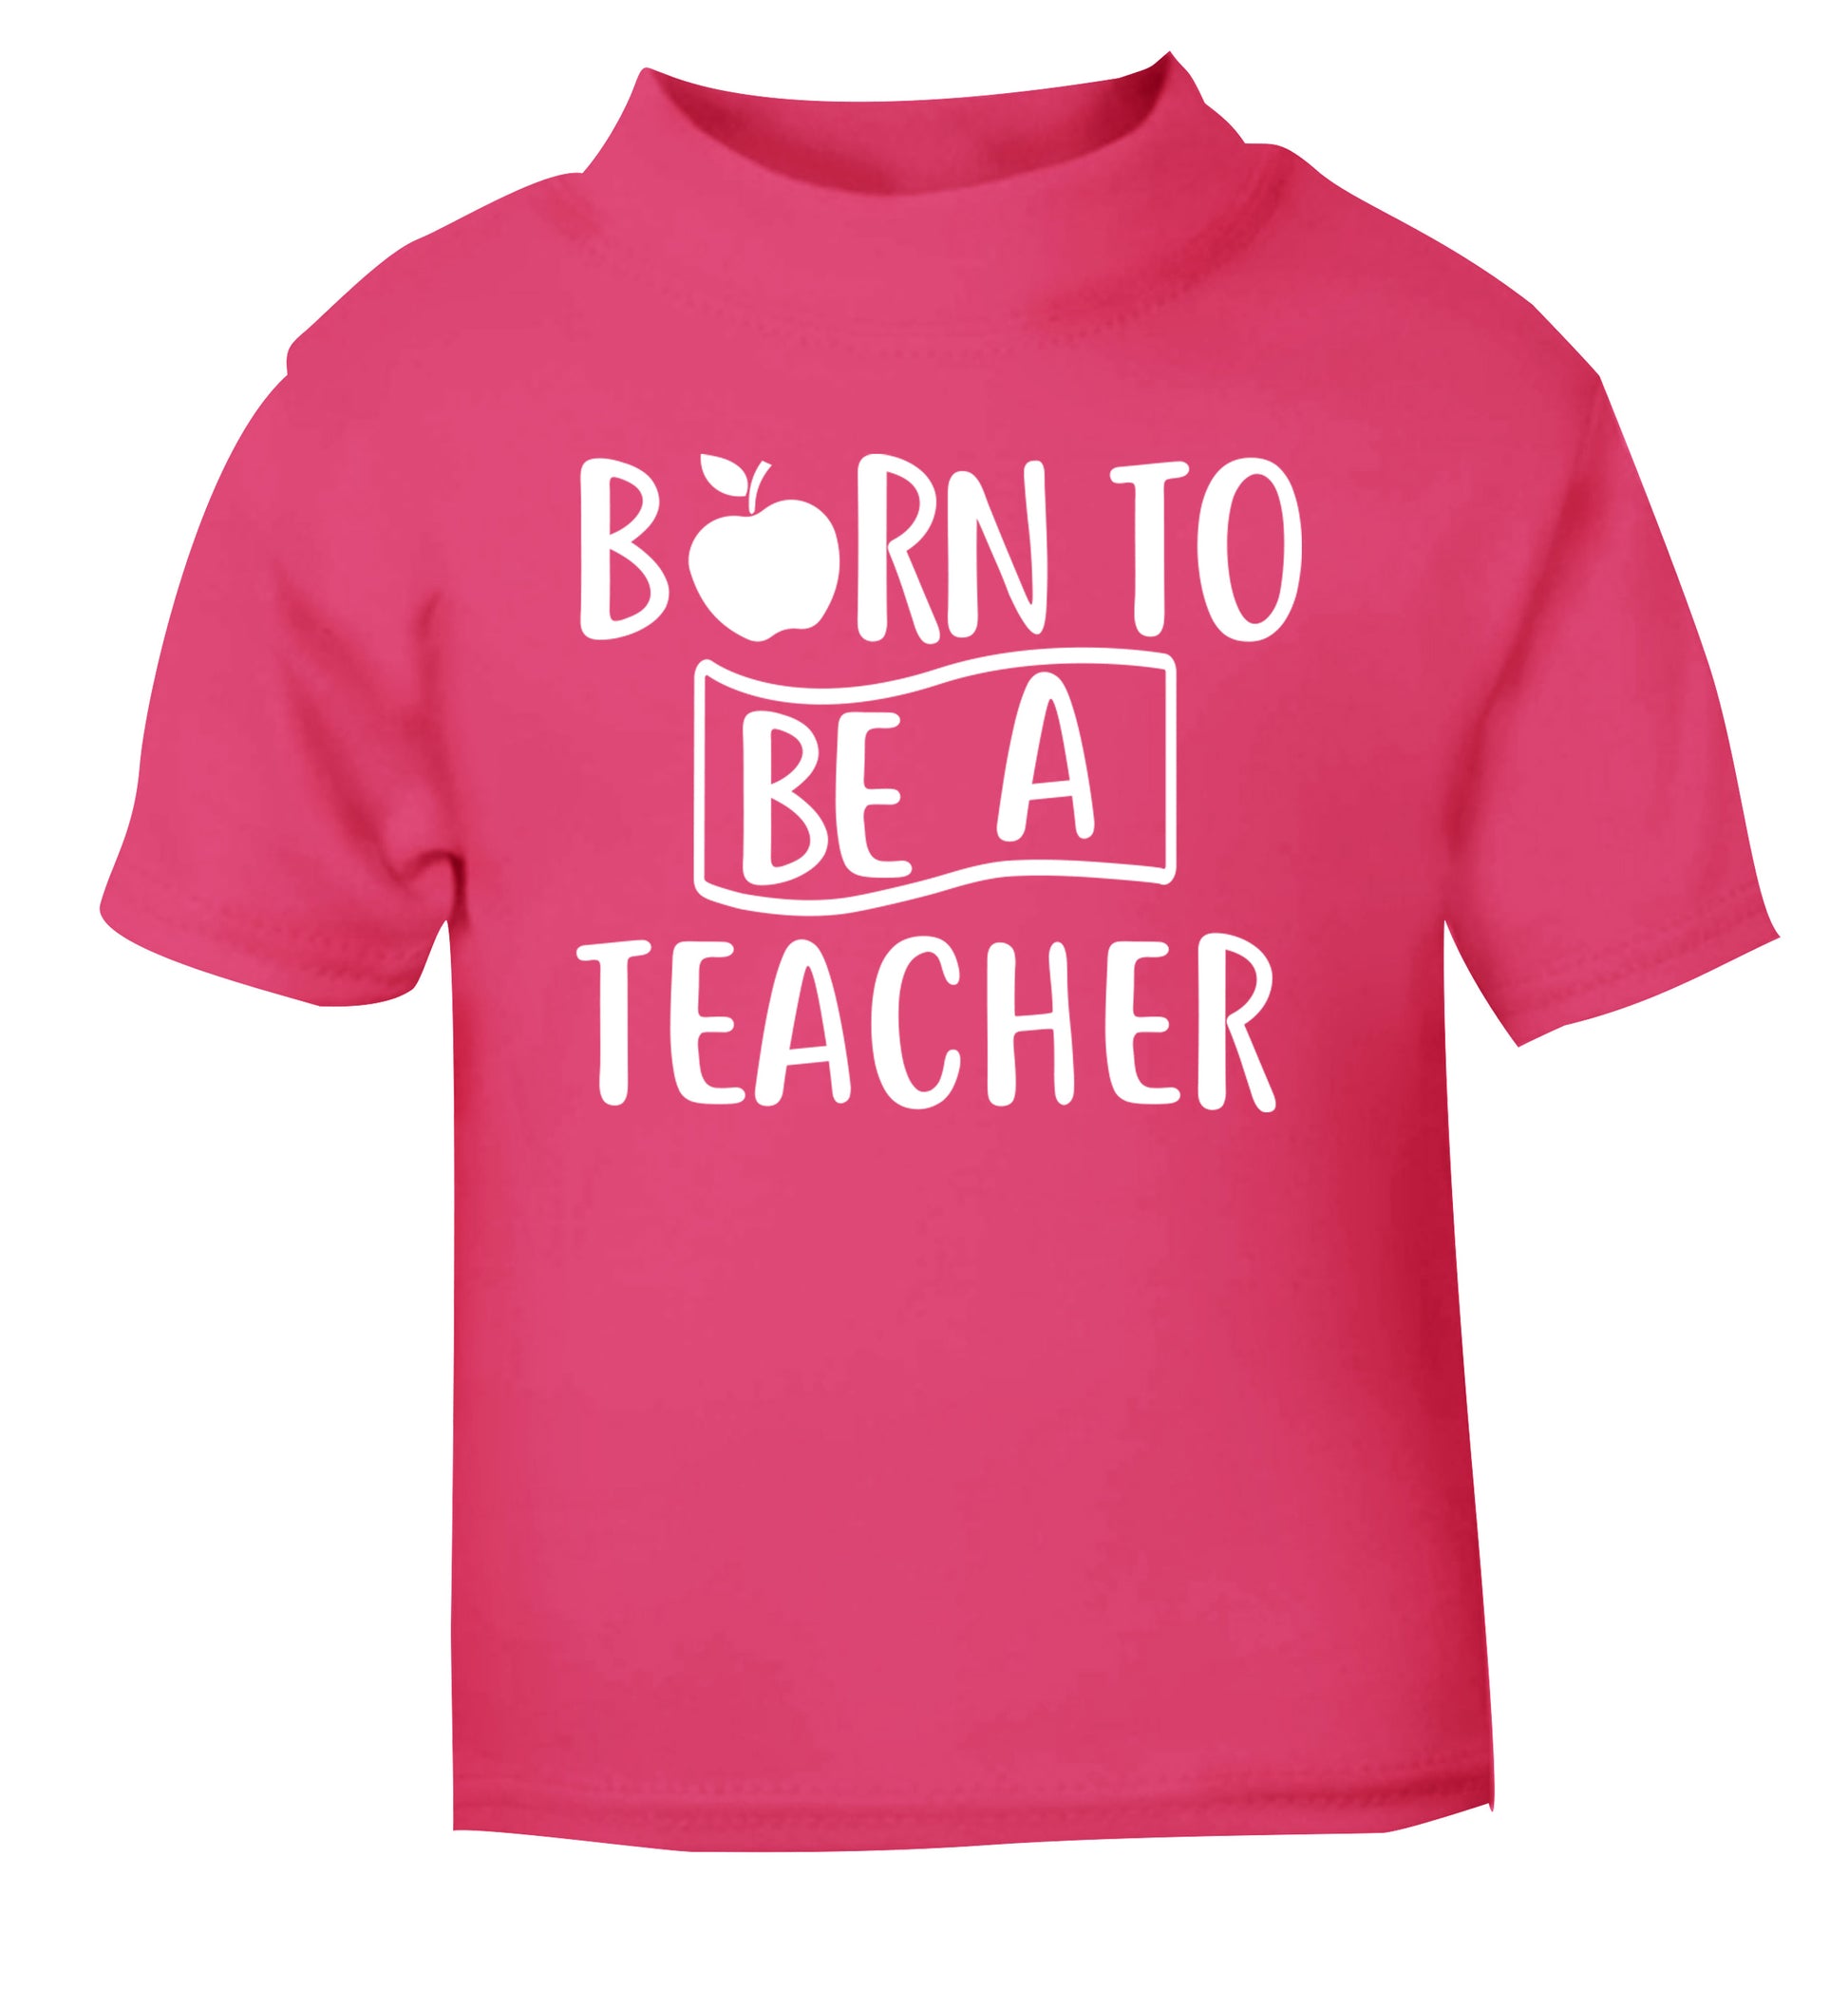 Born to be a teacher pink Baby Toddler Tshirt 2 Years